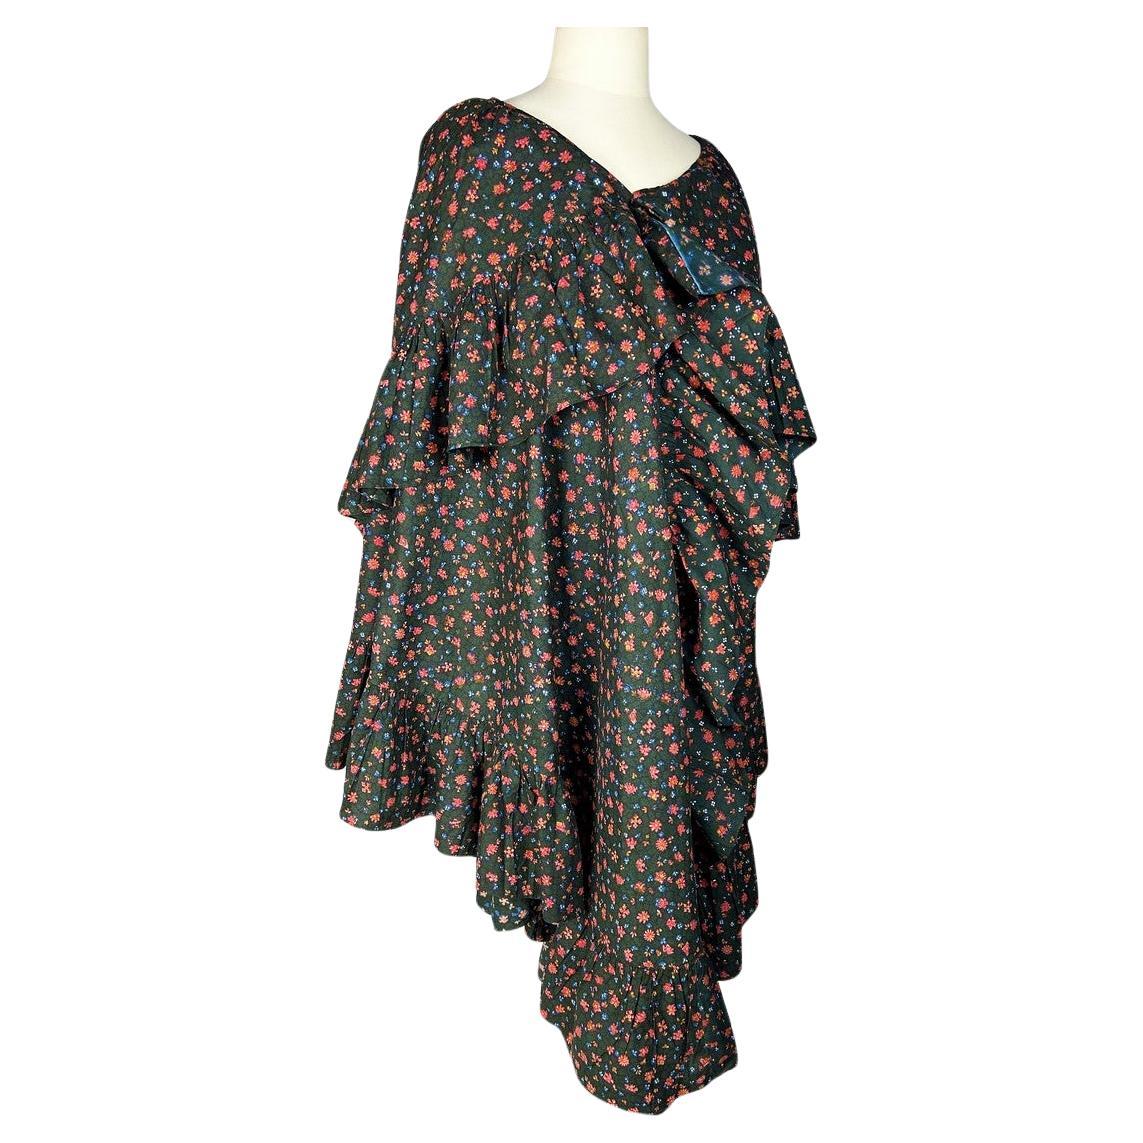 Circa 1820/1850
Provence

A small cape cloak with a large bonnet or Visite, also known as a Ramoneur in Provence. The printed cotton with bâton rompu design dates from the first half of the 19th century and was probably made in Alsace. Wax-resist